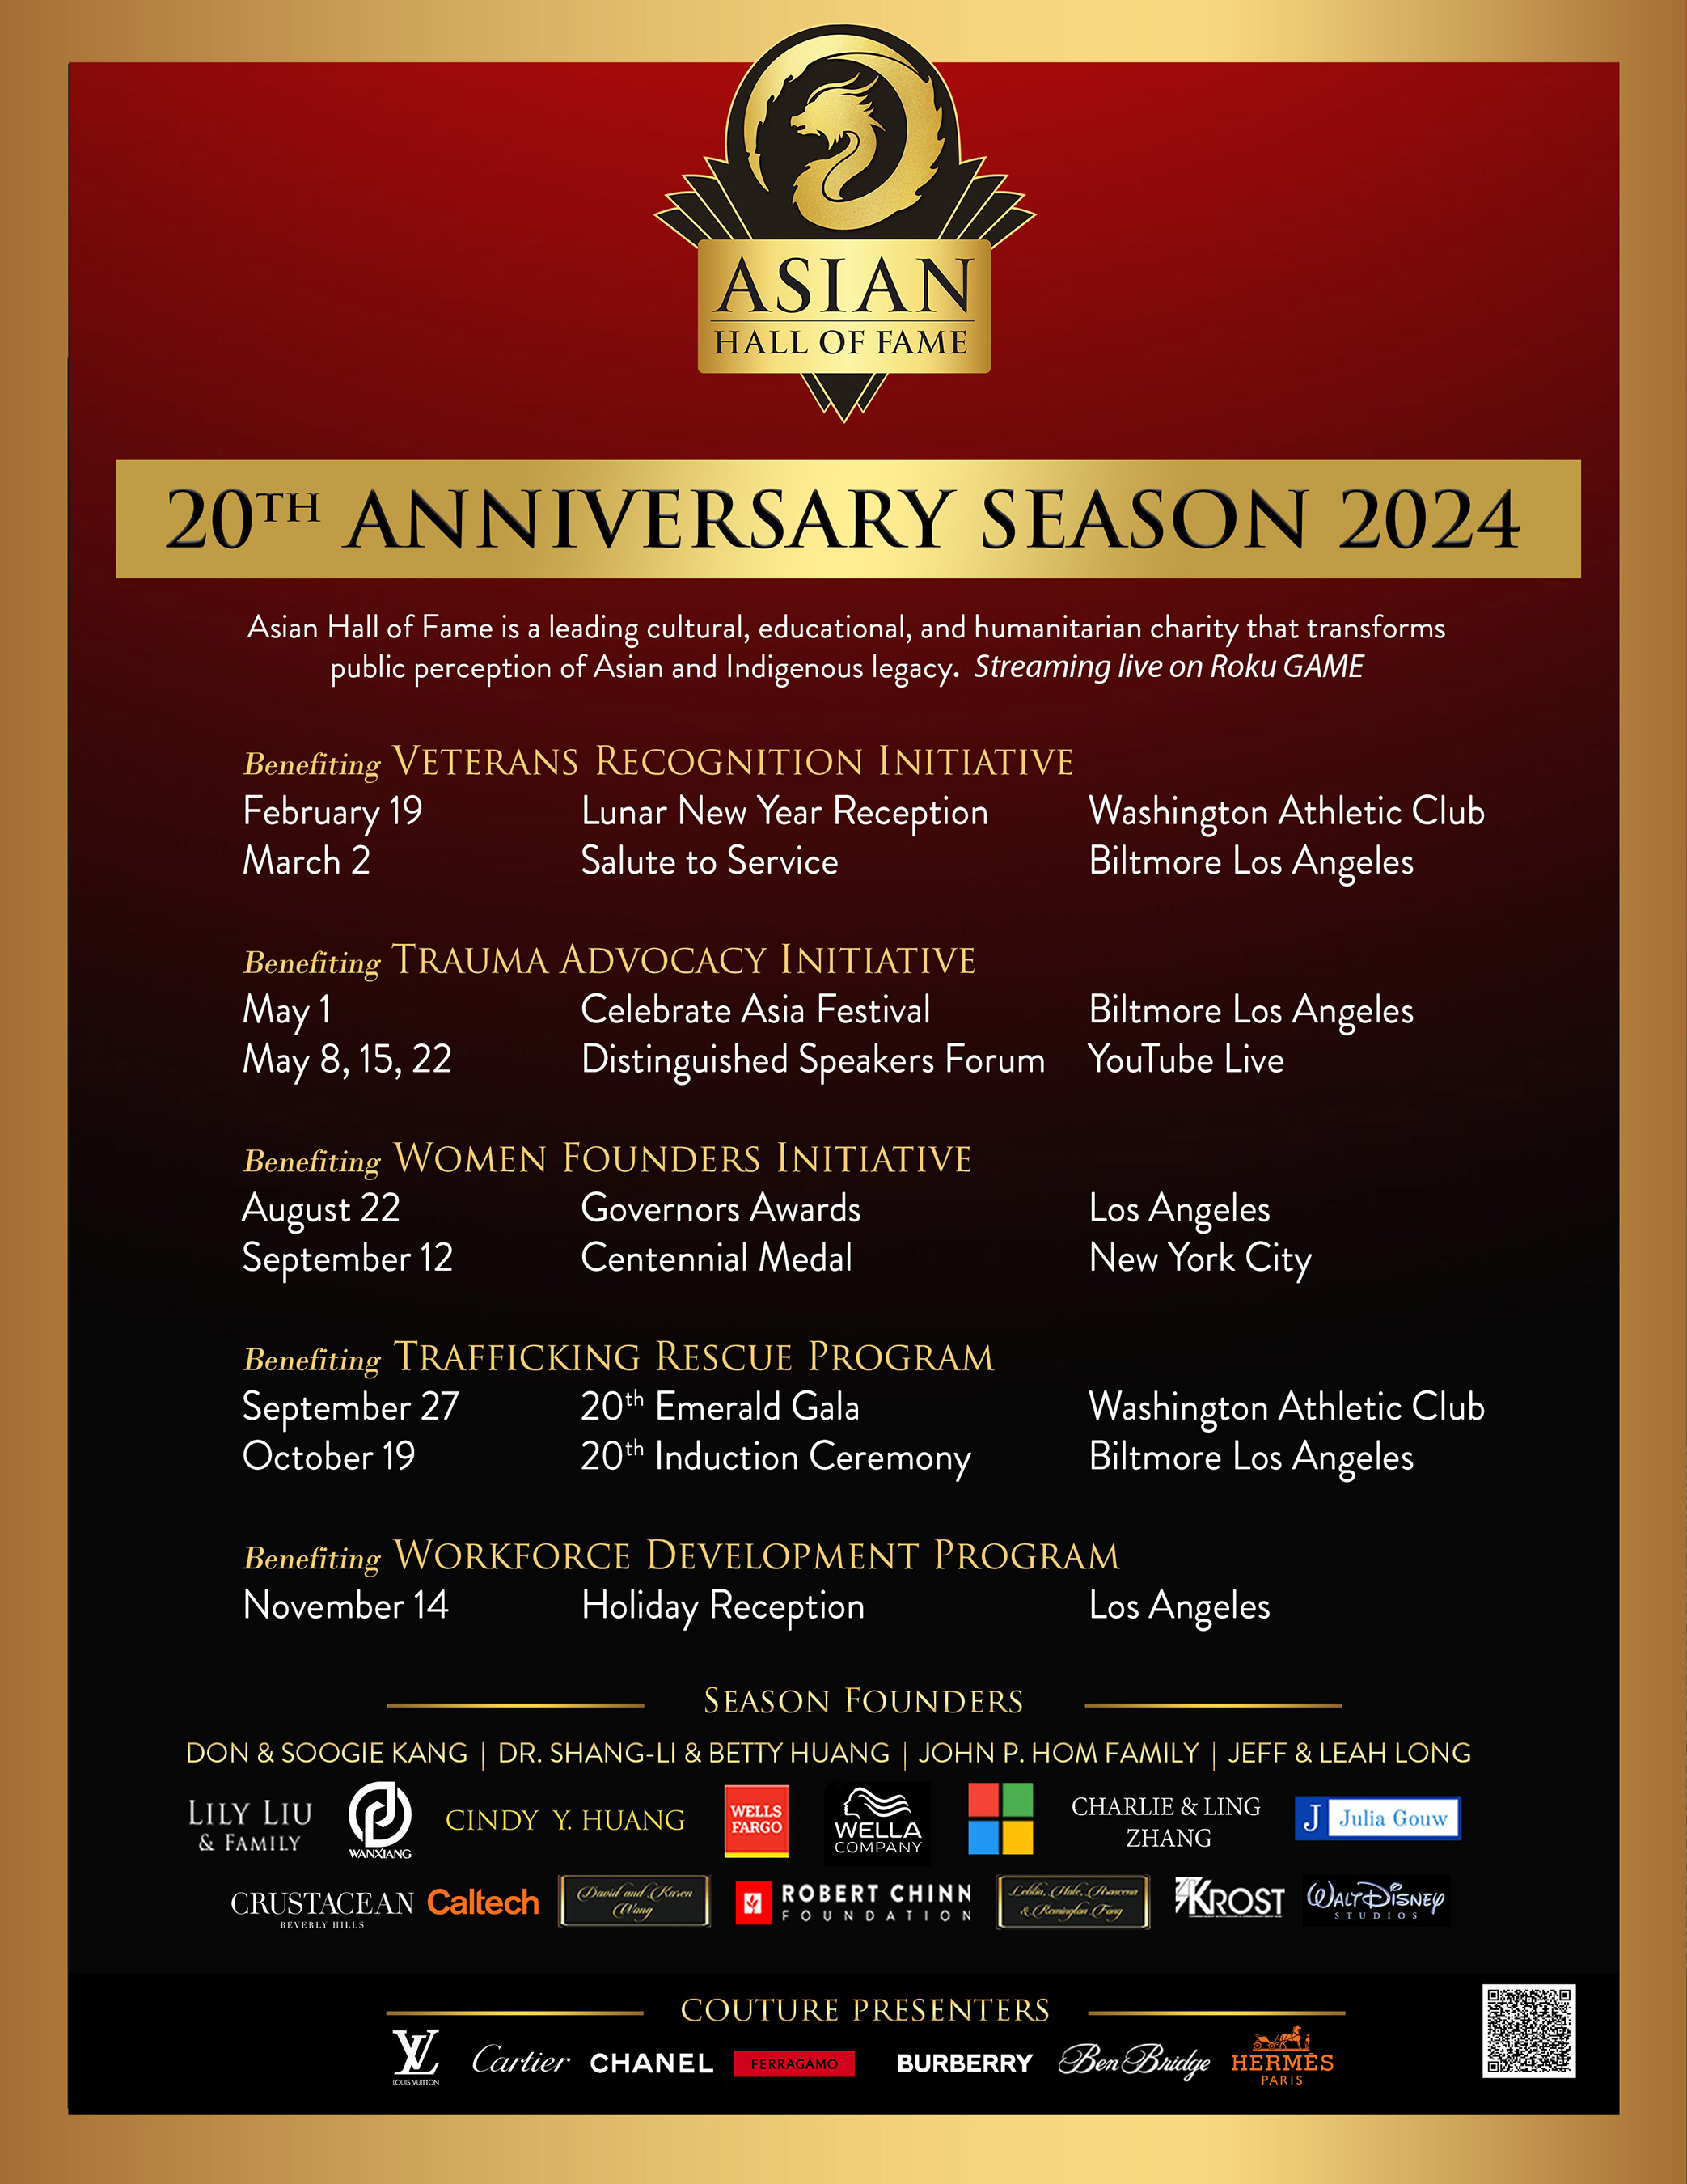 ASIAN HALL OF FAME UNVEILS 20th-ANNIVERSARY SEASON